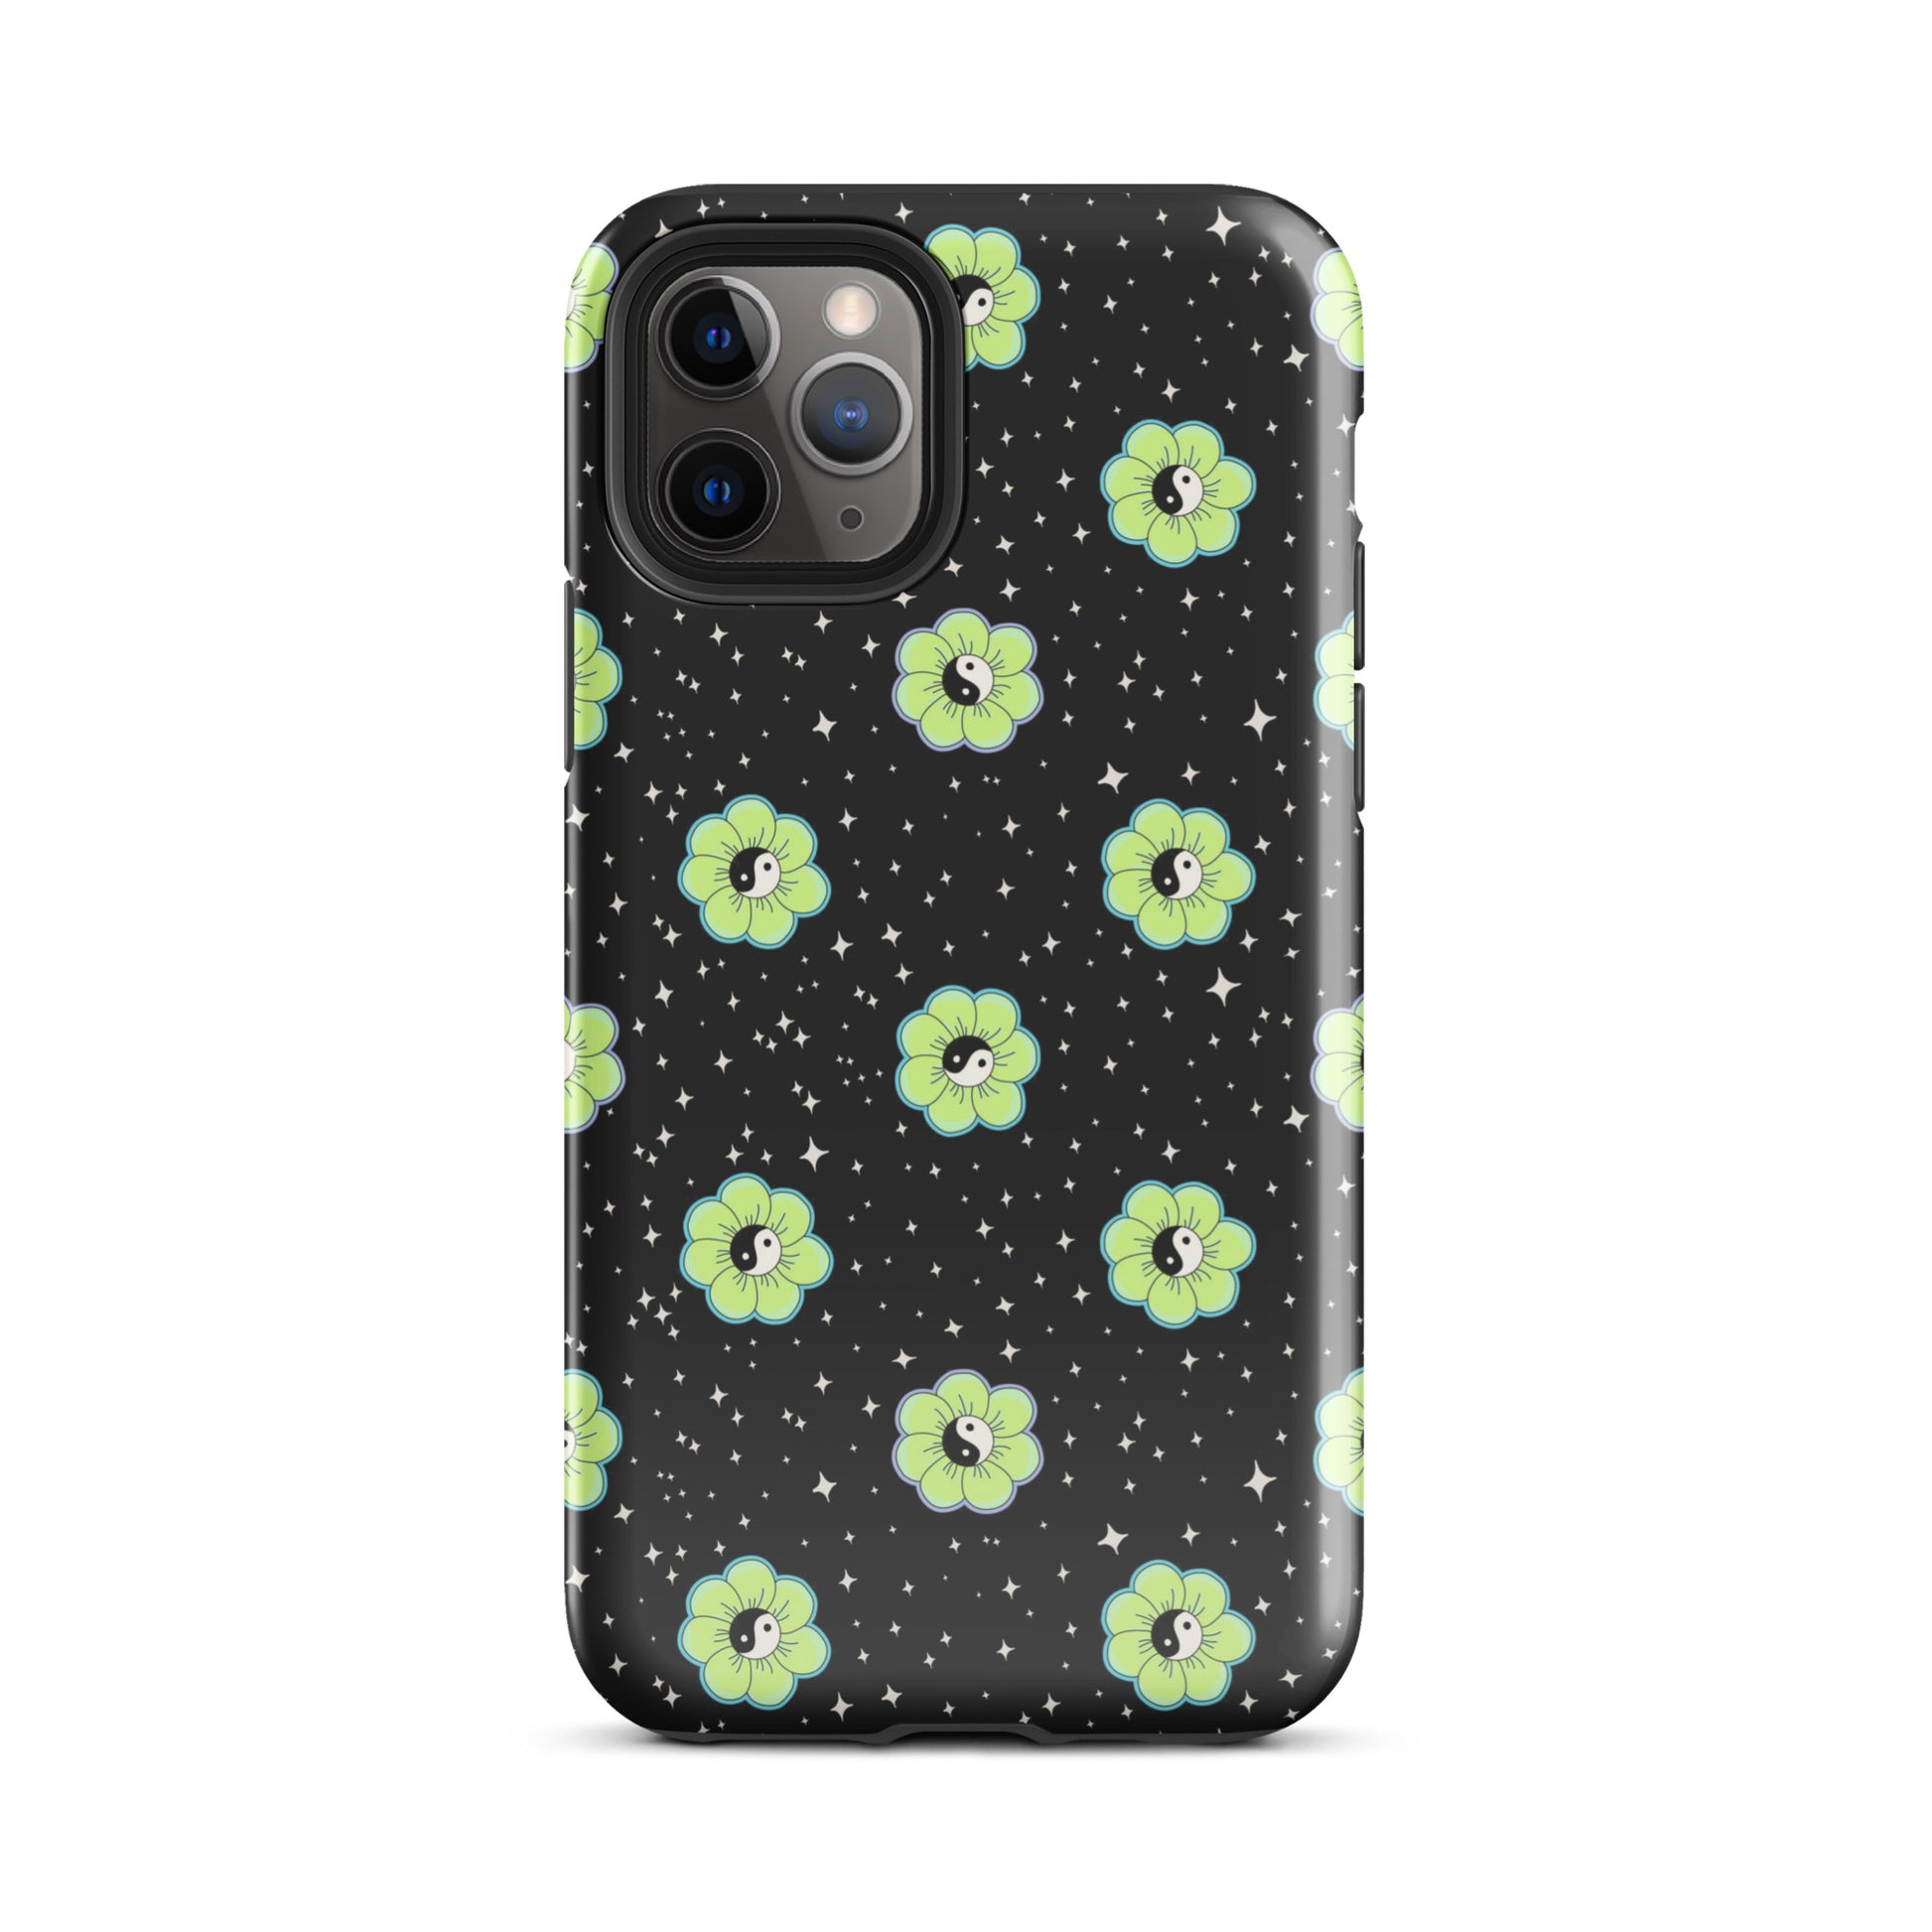 Yin & Yang Bloom iPhone Case iPhone 11 Pro Glossy